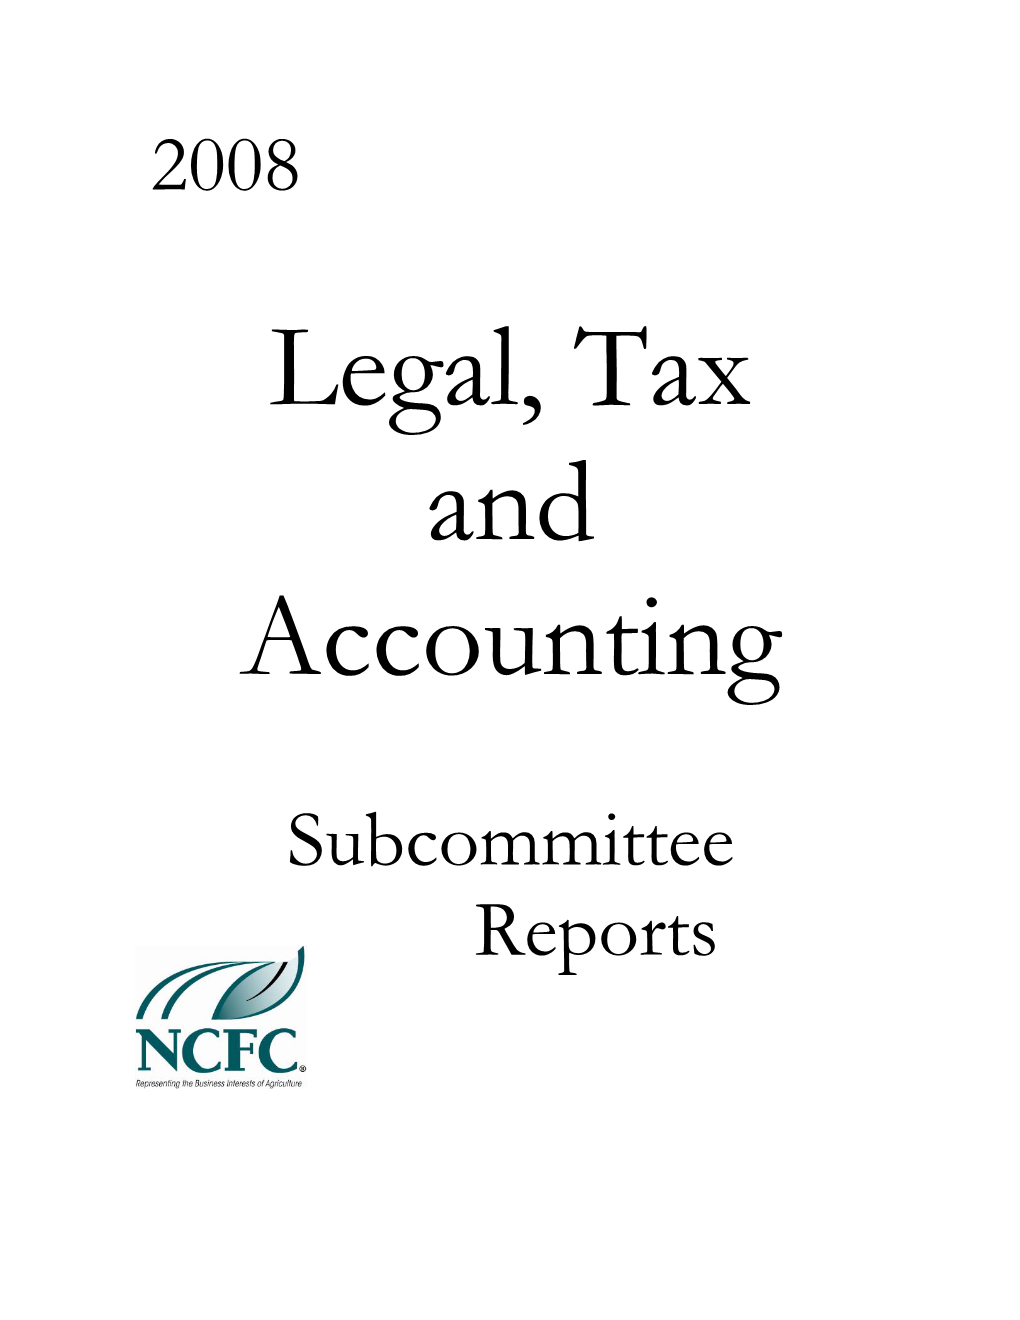 2008 Subcommittee Reports of the Legal, Tax and Accounting Committee